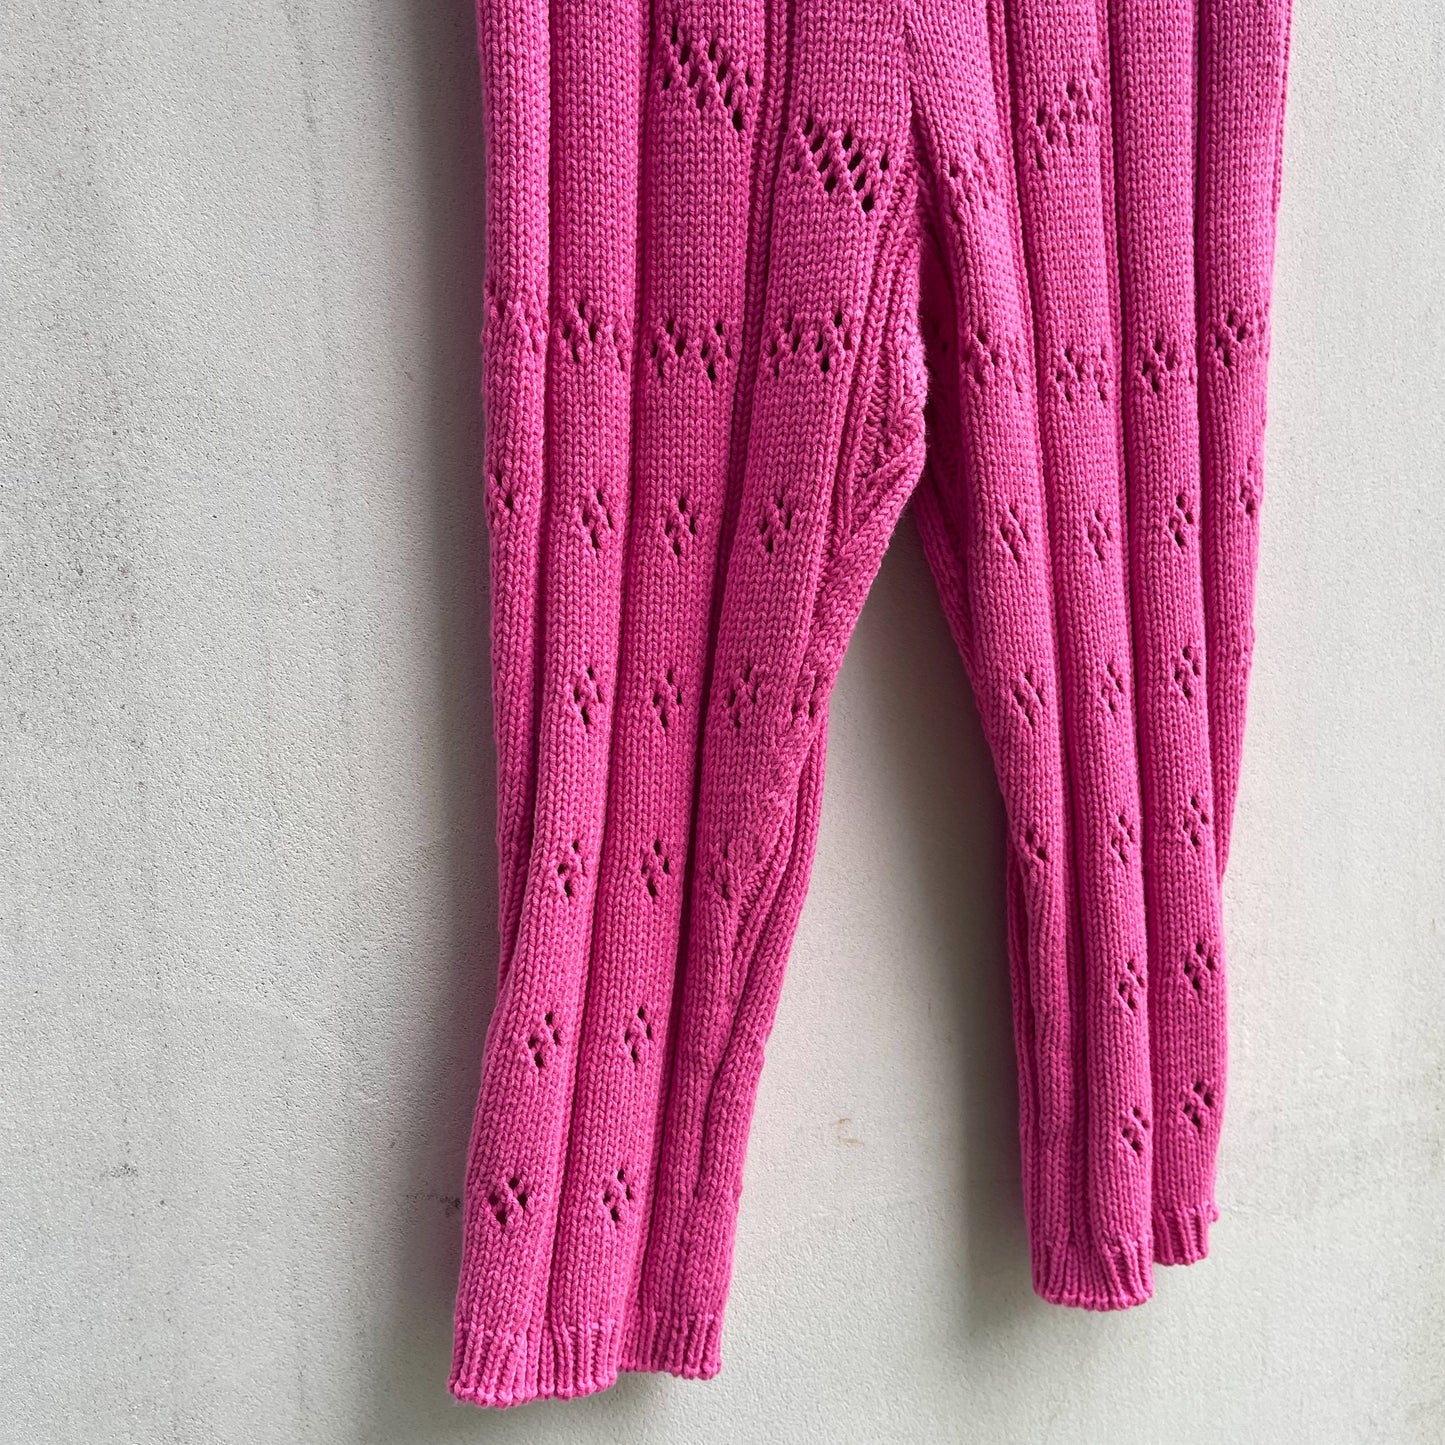 CLUELESS KNIT PANTS / PINK / ニットパンツ